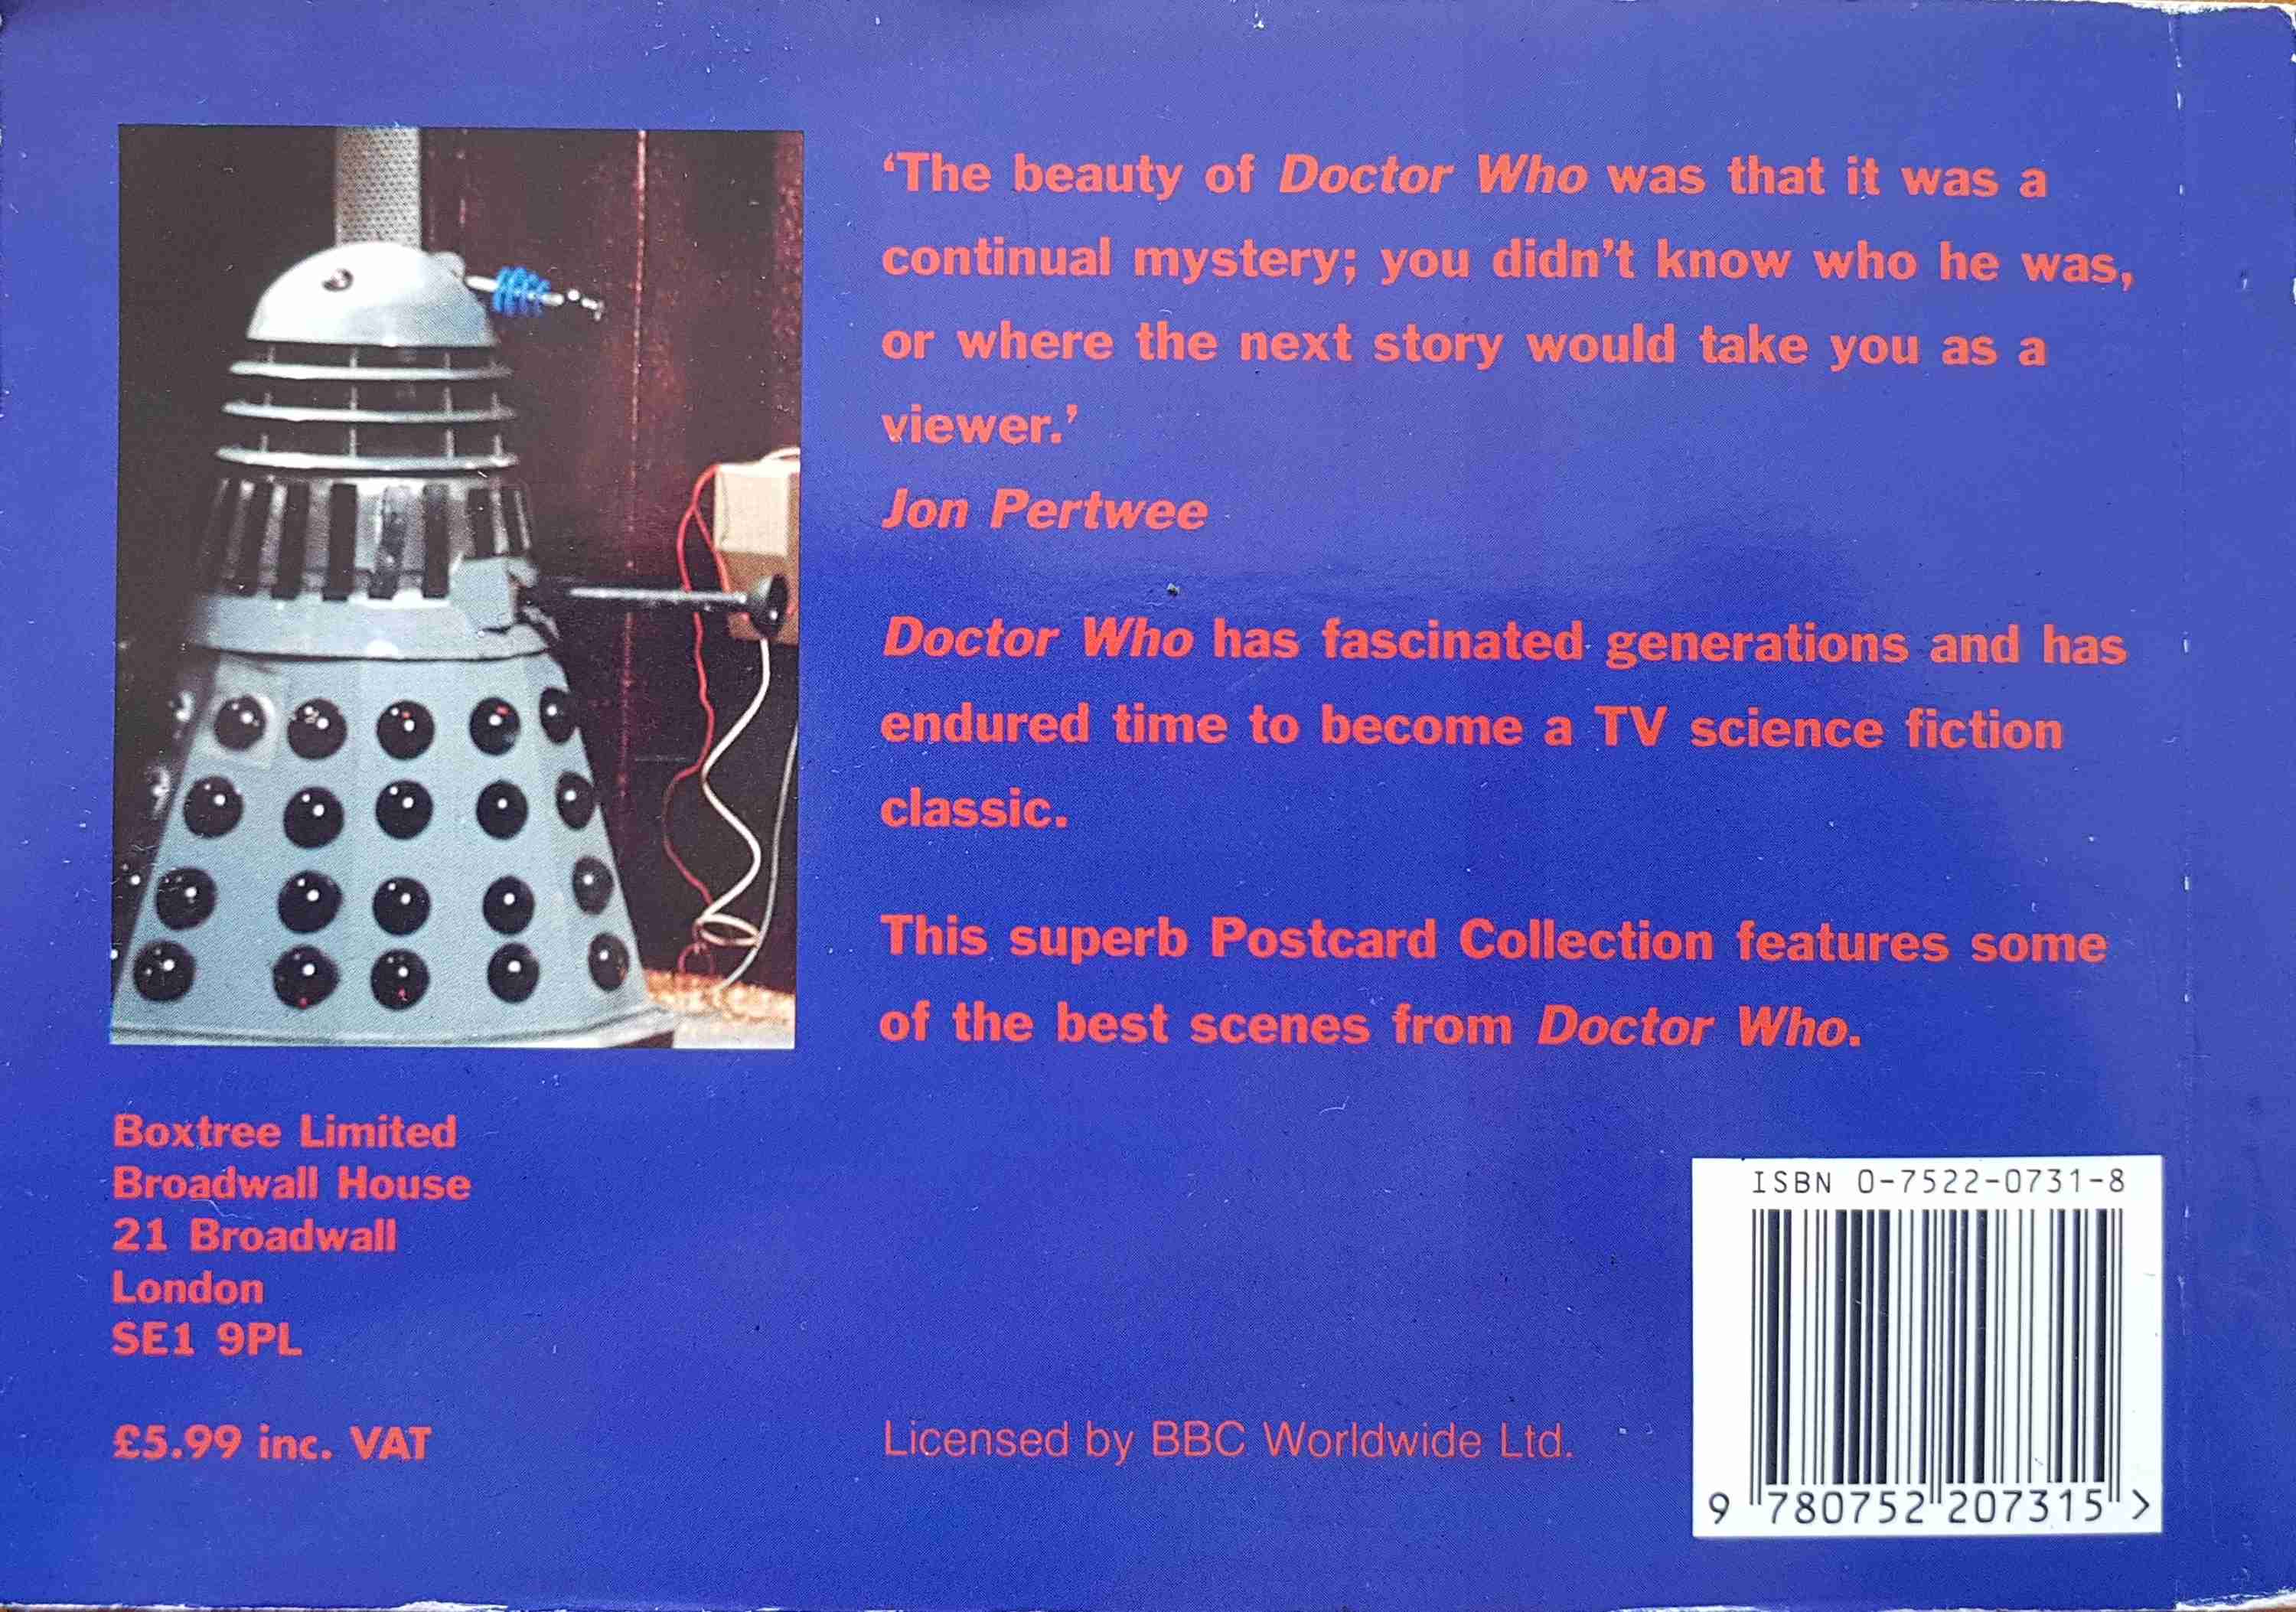 Picture of 0-7522-0731-8 Doctor Who - Postcard collection by artist Adrian Rigelsford from the BBC records and Tapes library